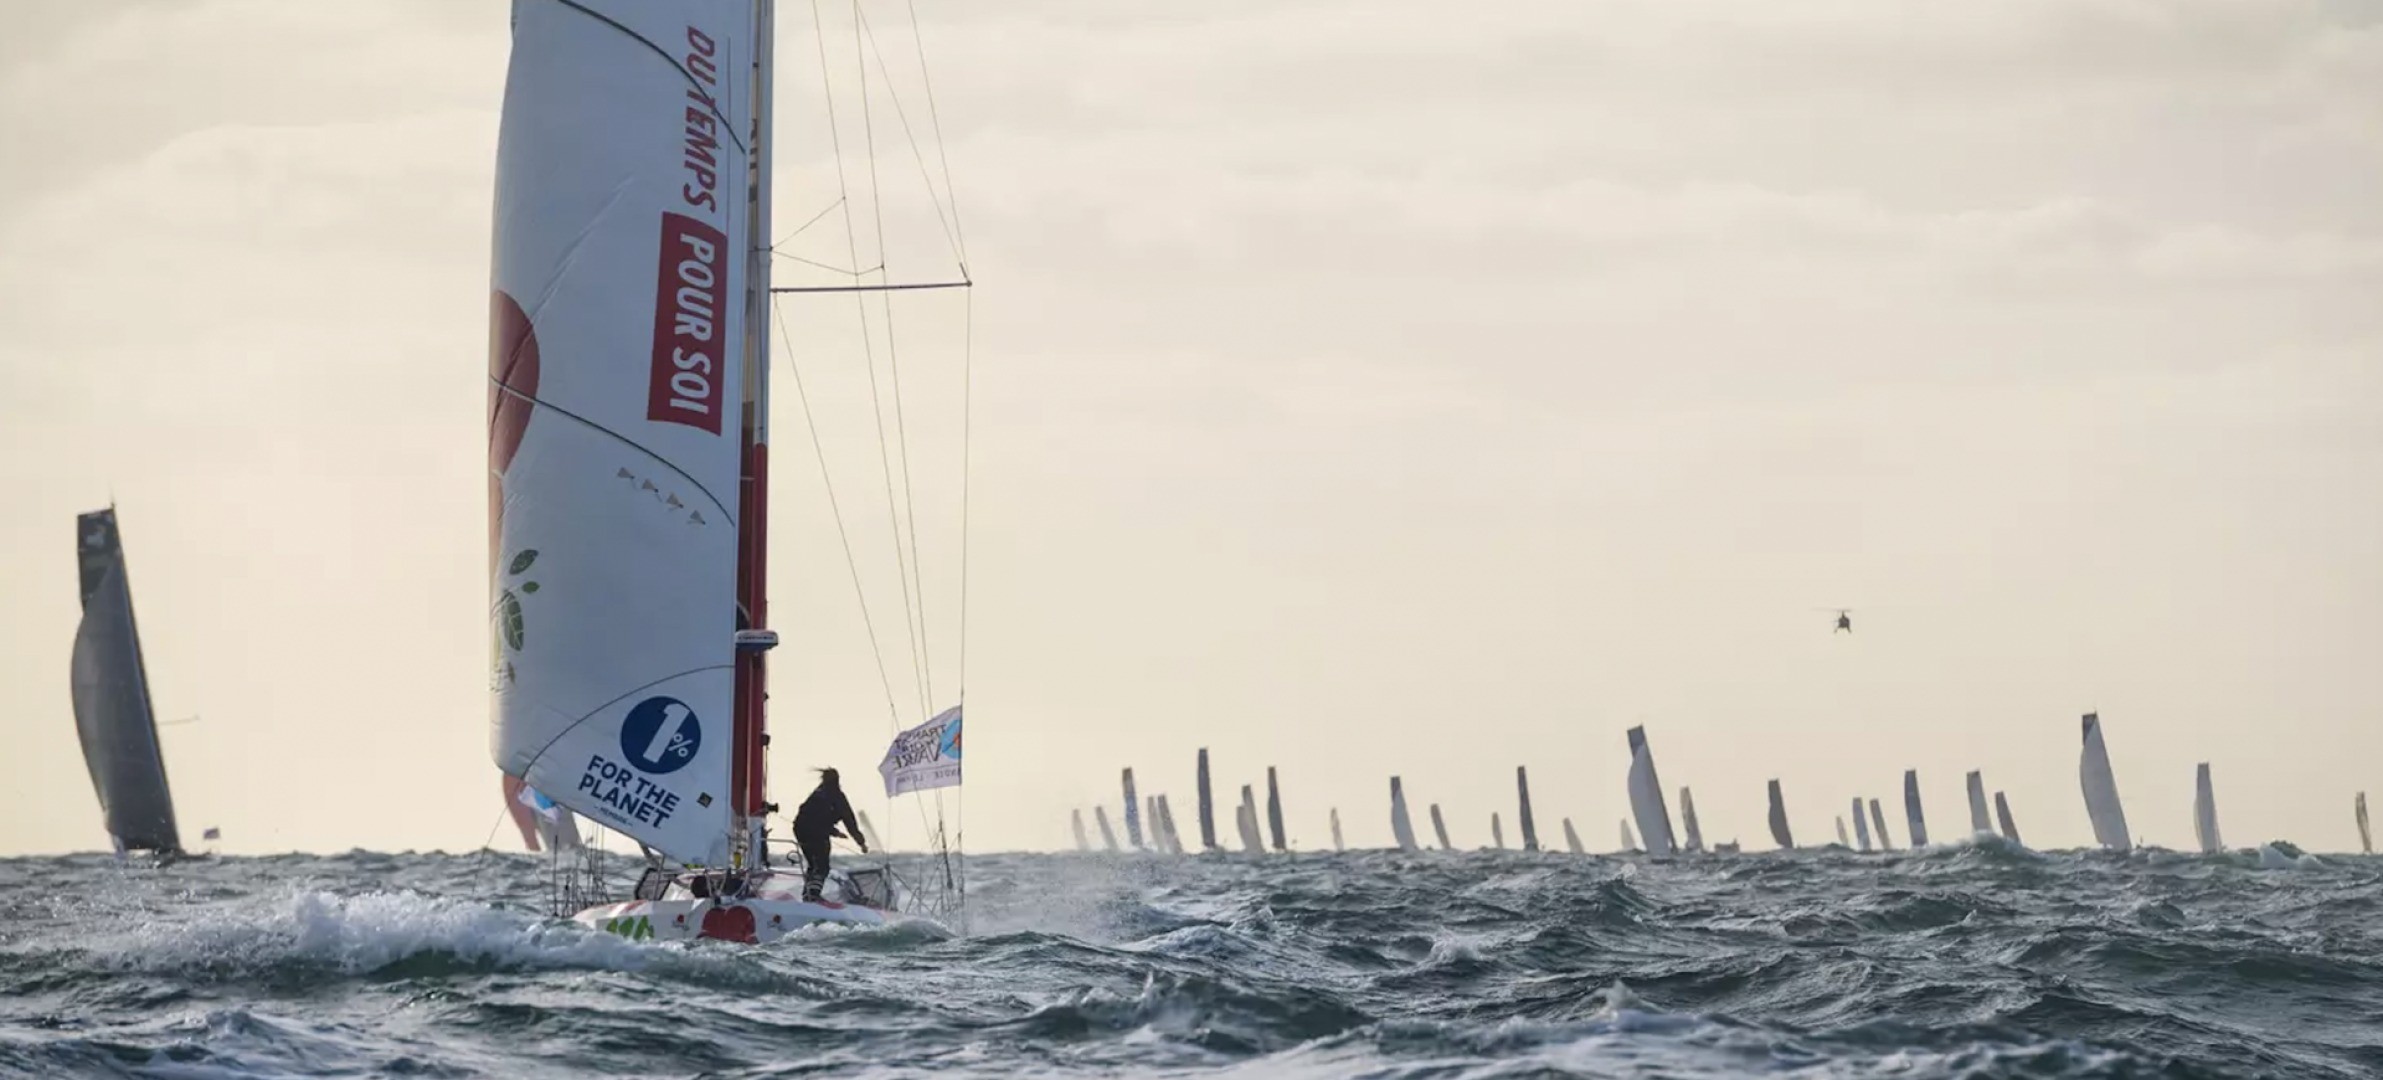 Transat Jacques Vabre: no start before Monday for any class